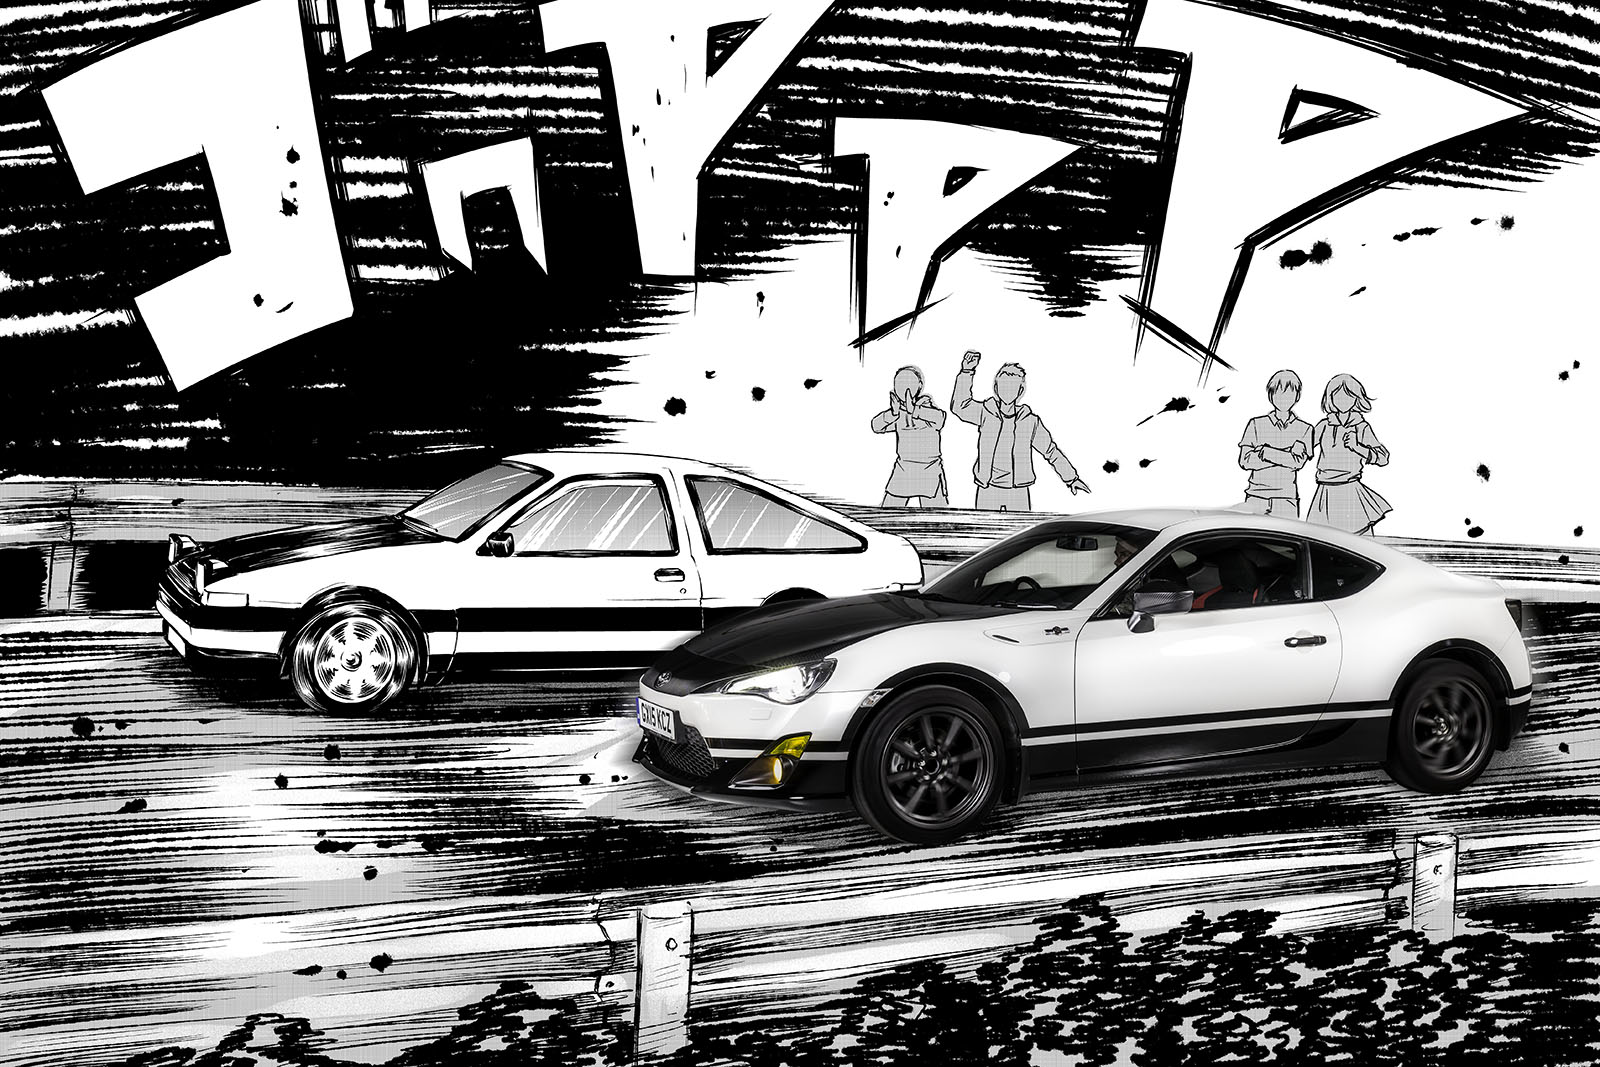 NEWS: Toyota creates Initial D-inspired 86